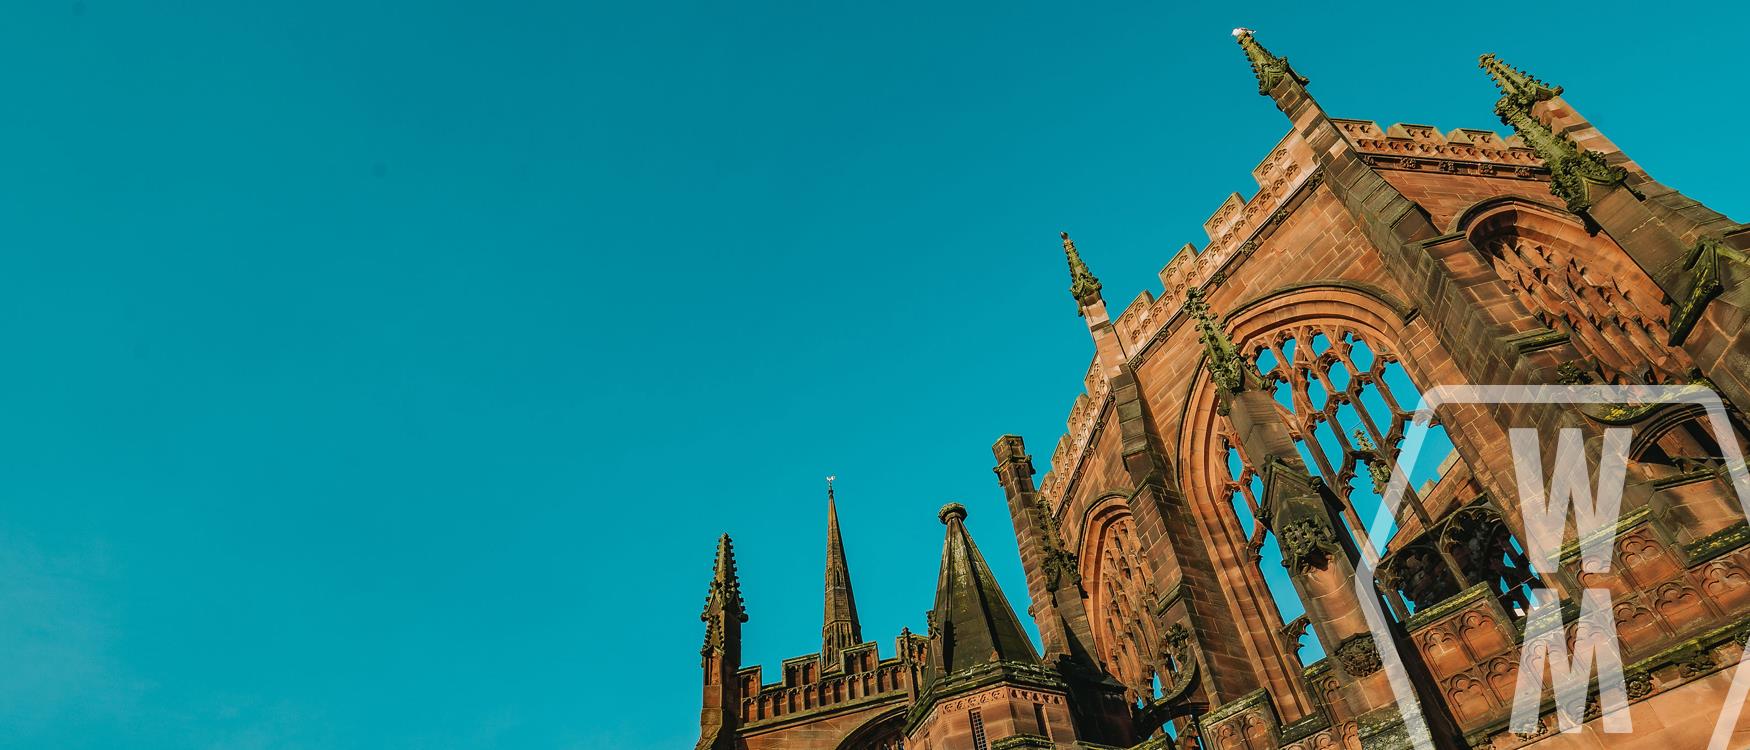 coventry sightseeing bus tour